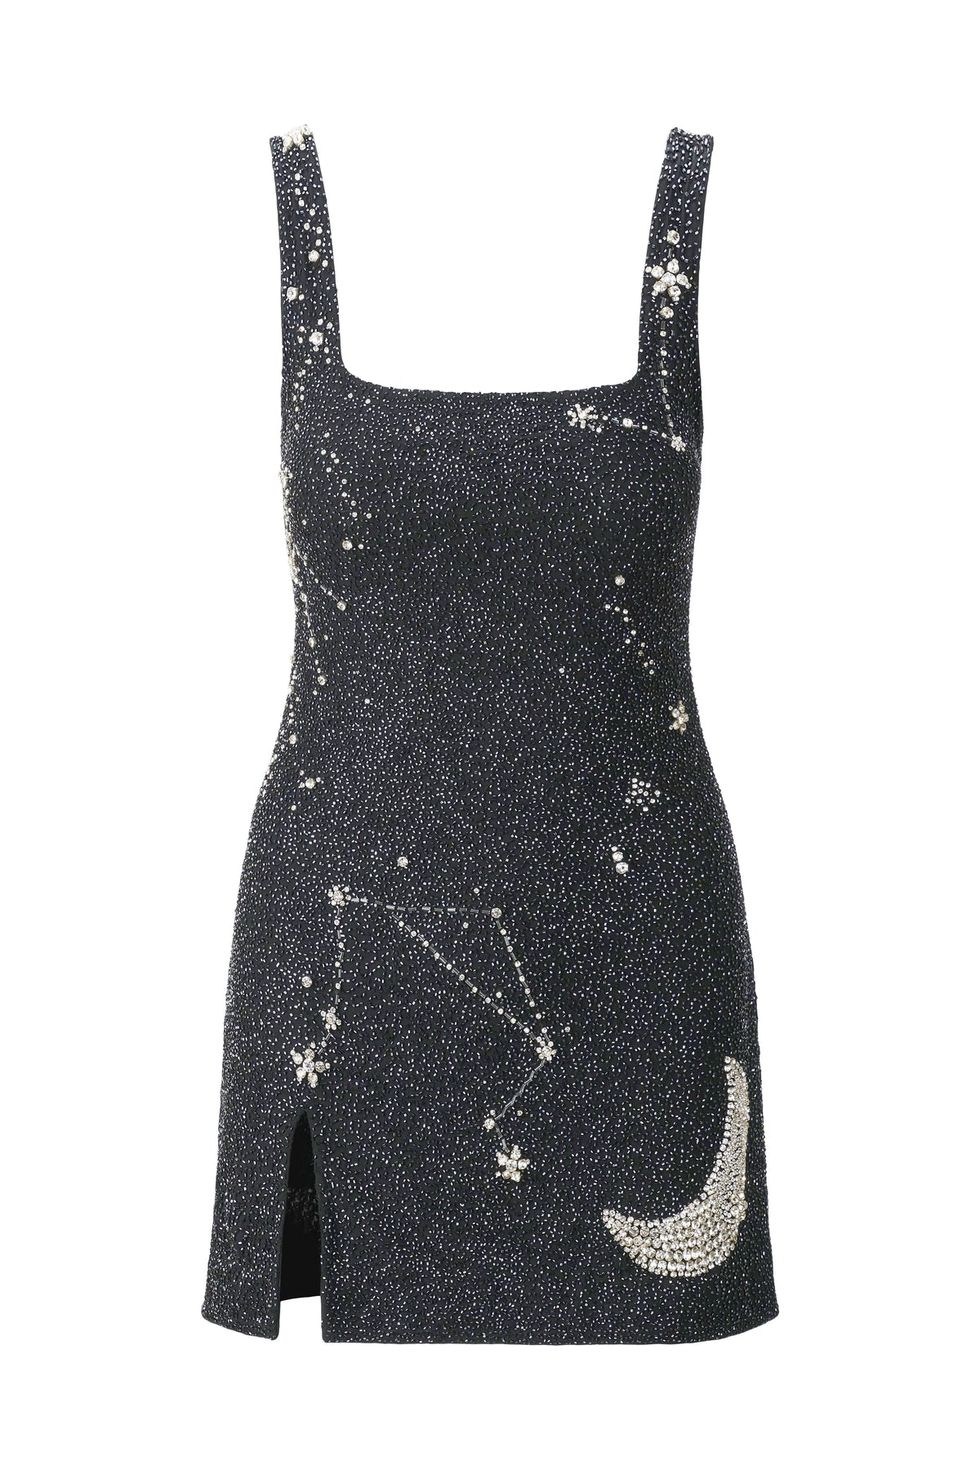 LE SABLE DRESS  STARRY NIGHT